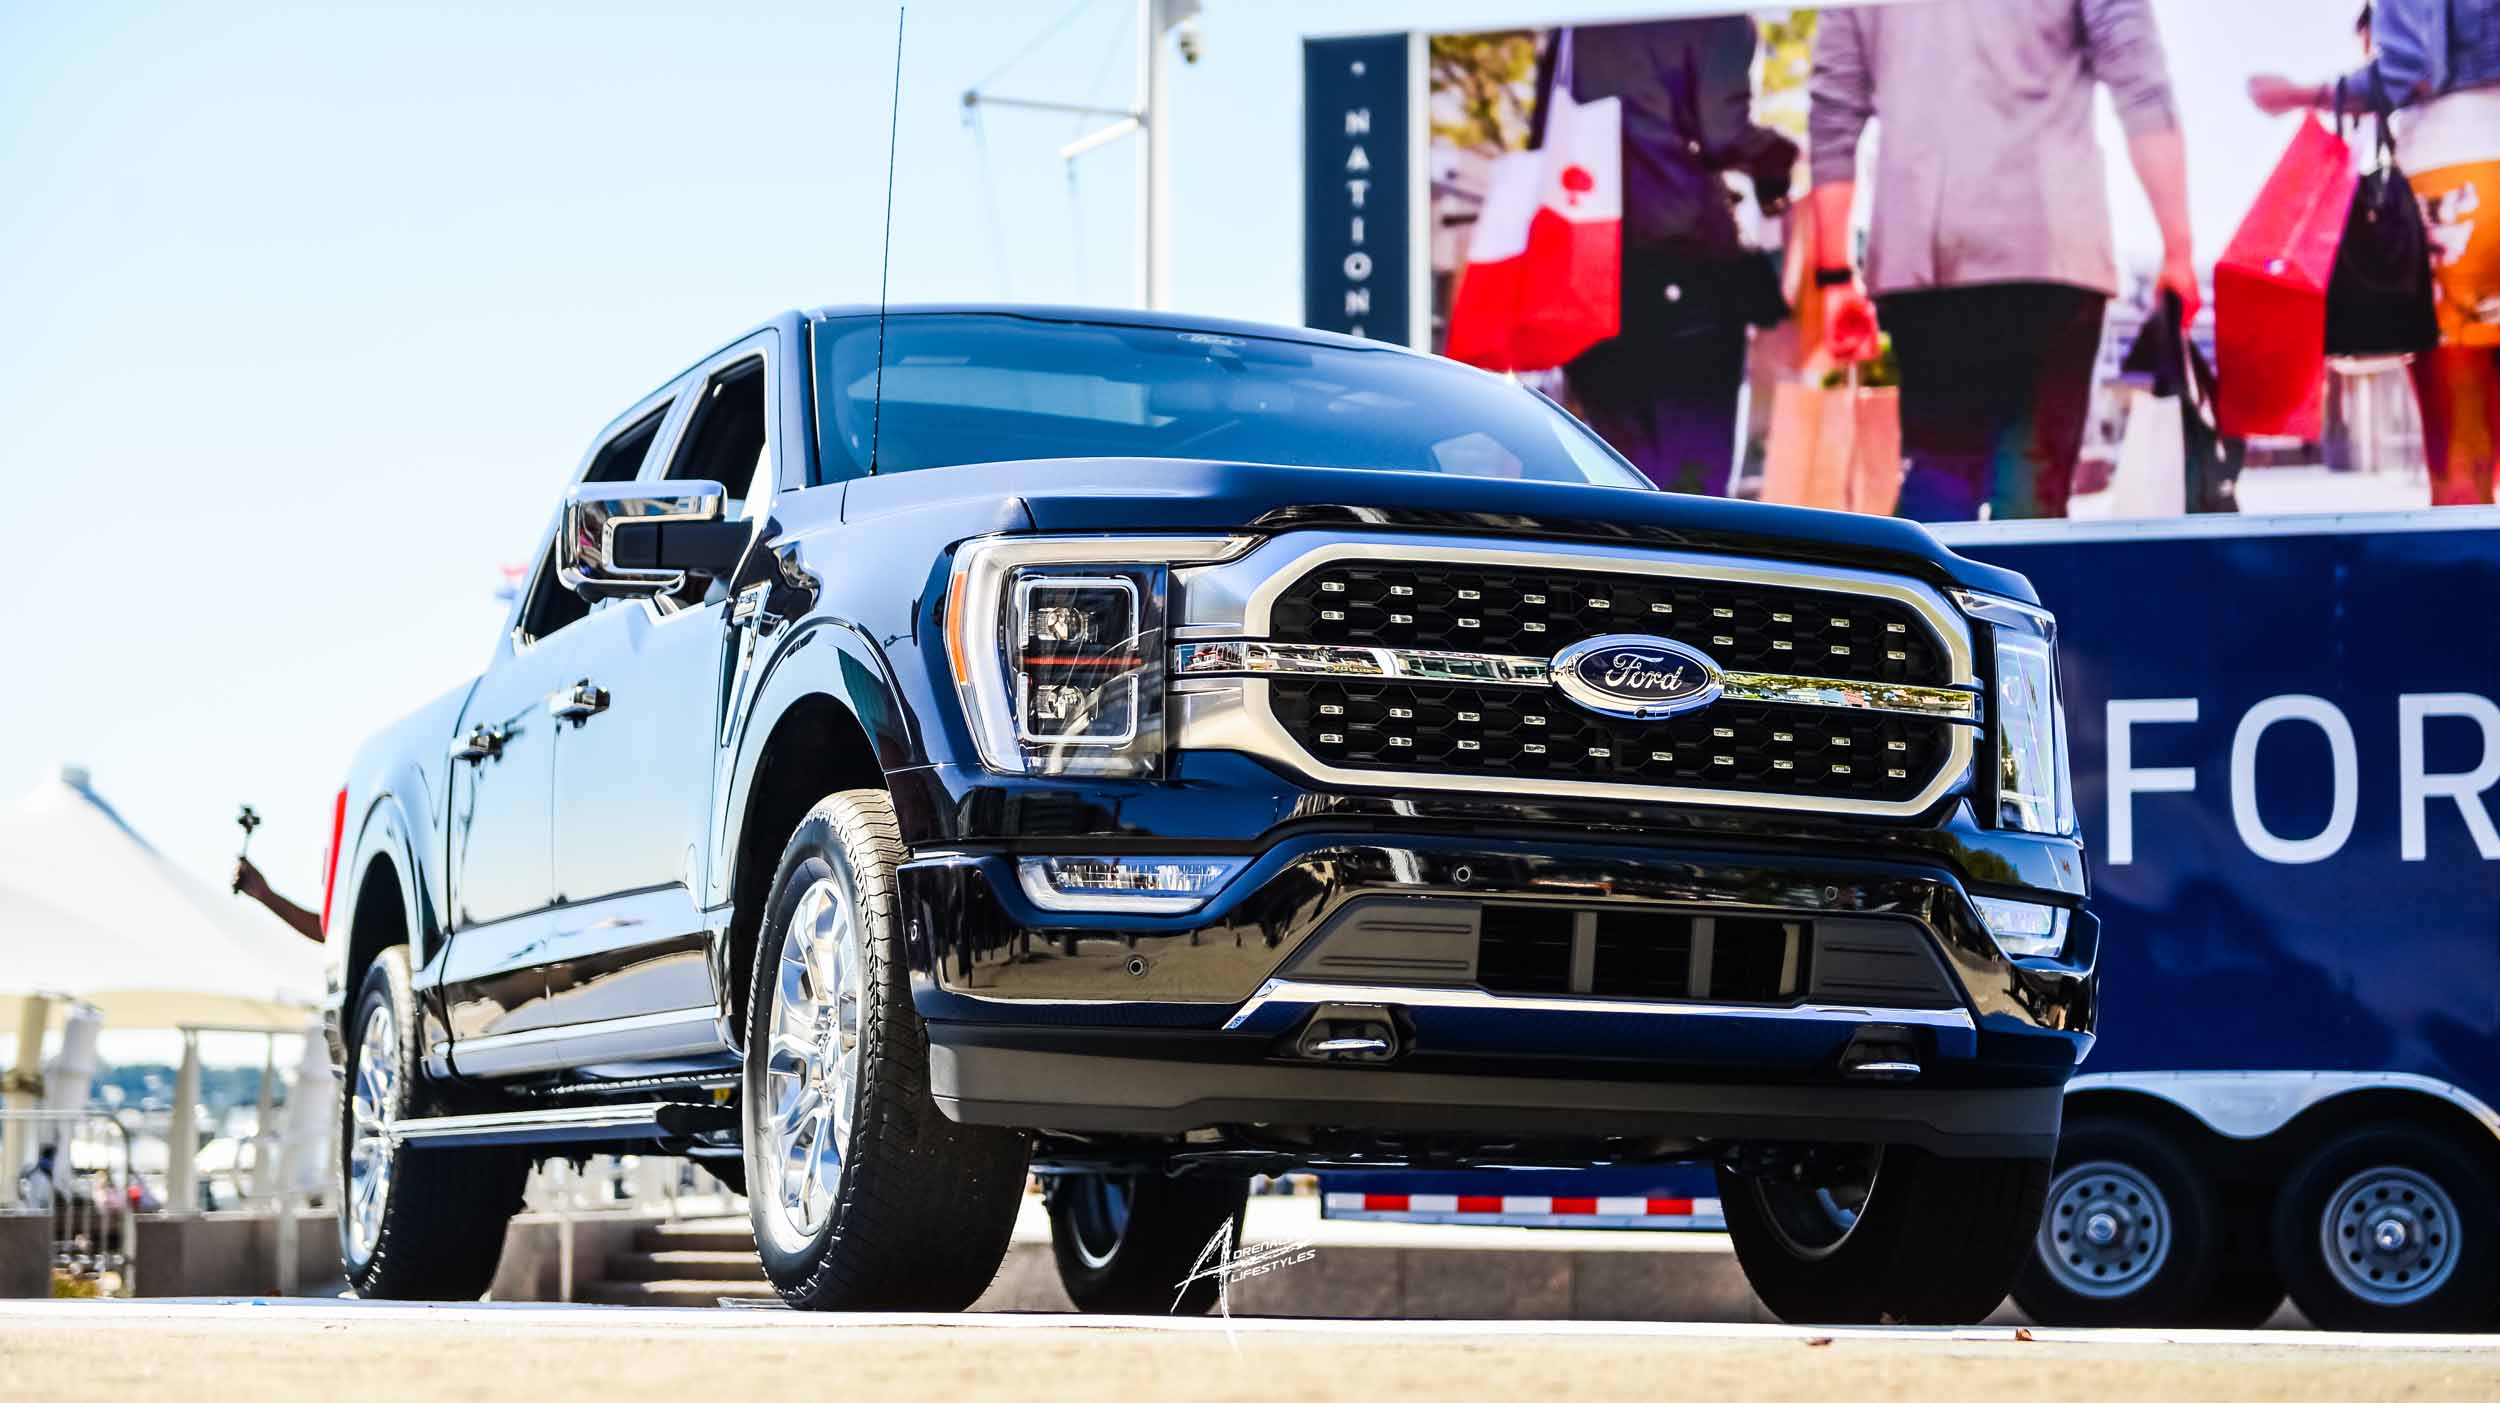 Sneak peak of the 2021 Ford F-150 at the National Harbor – Adrenaline ...